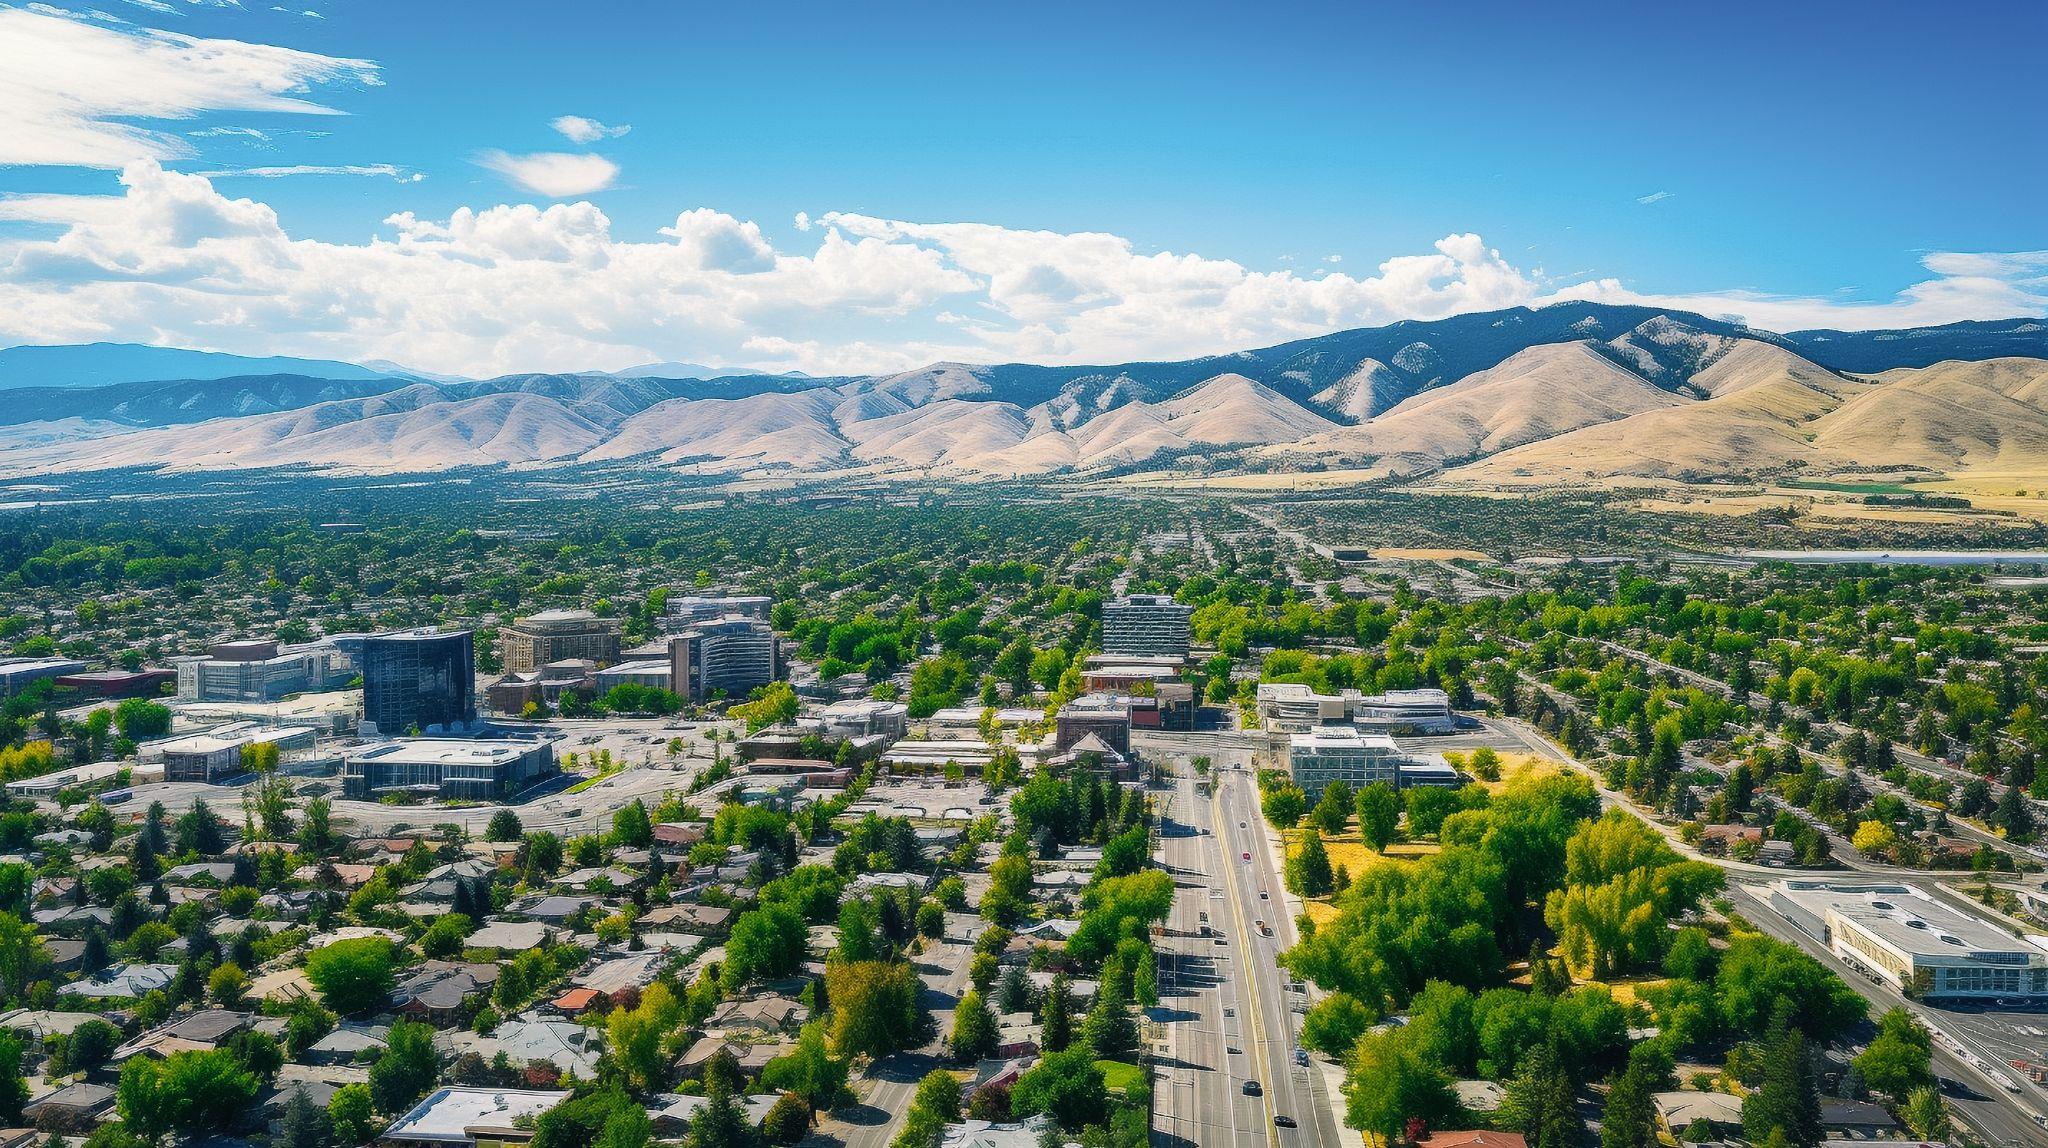 Boise Idaho drone photo of downtown Boise and neighboring mountains